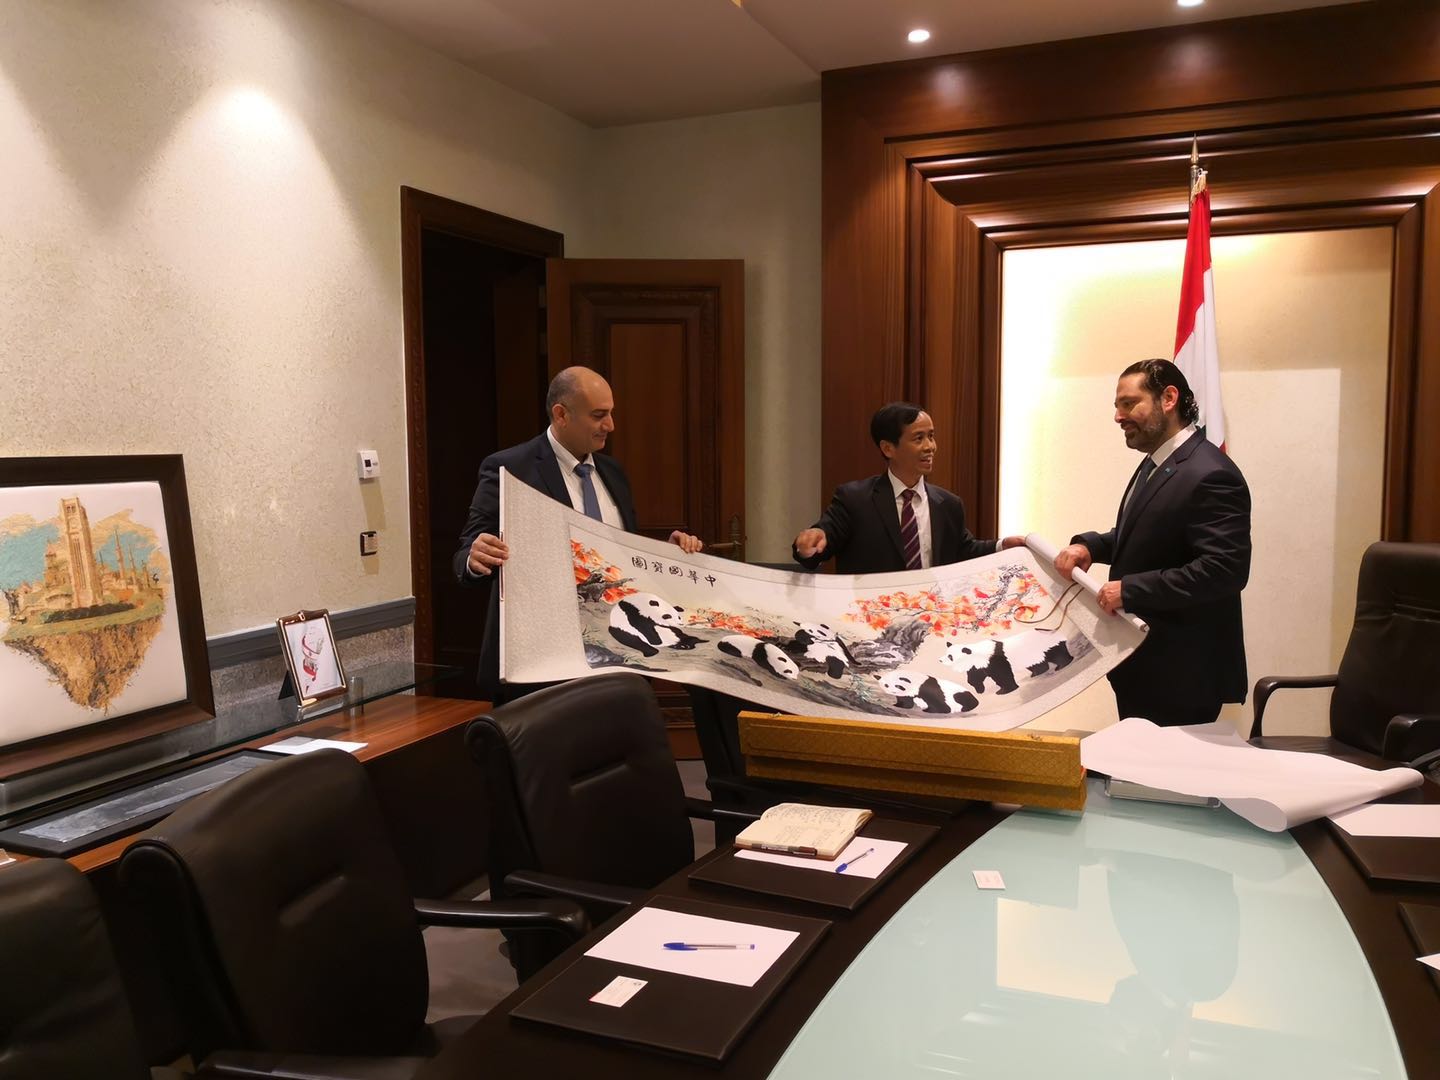 The delegation presented a Chinese painting to H.E. Mr. Hariri as a gift.